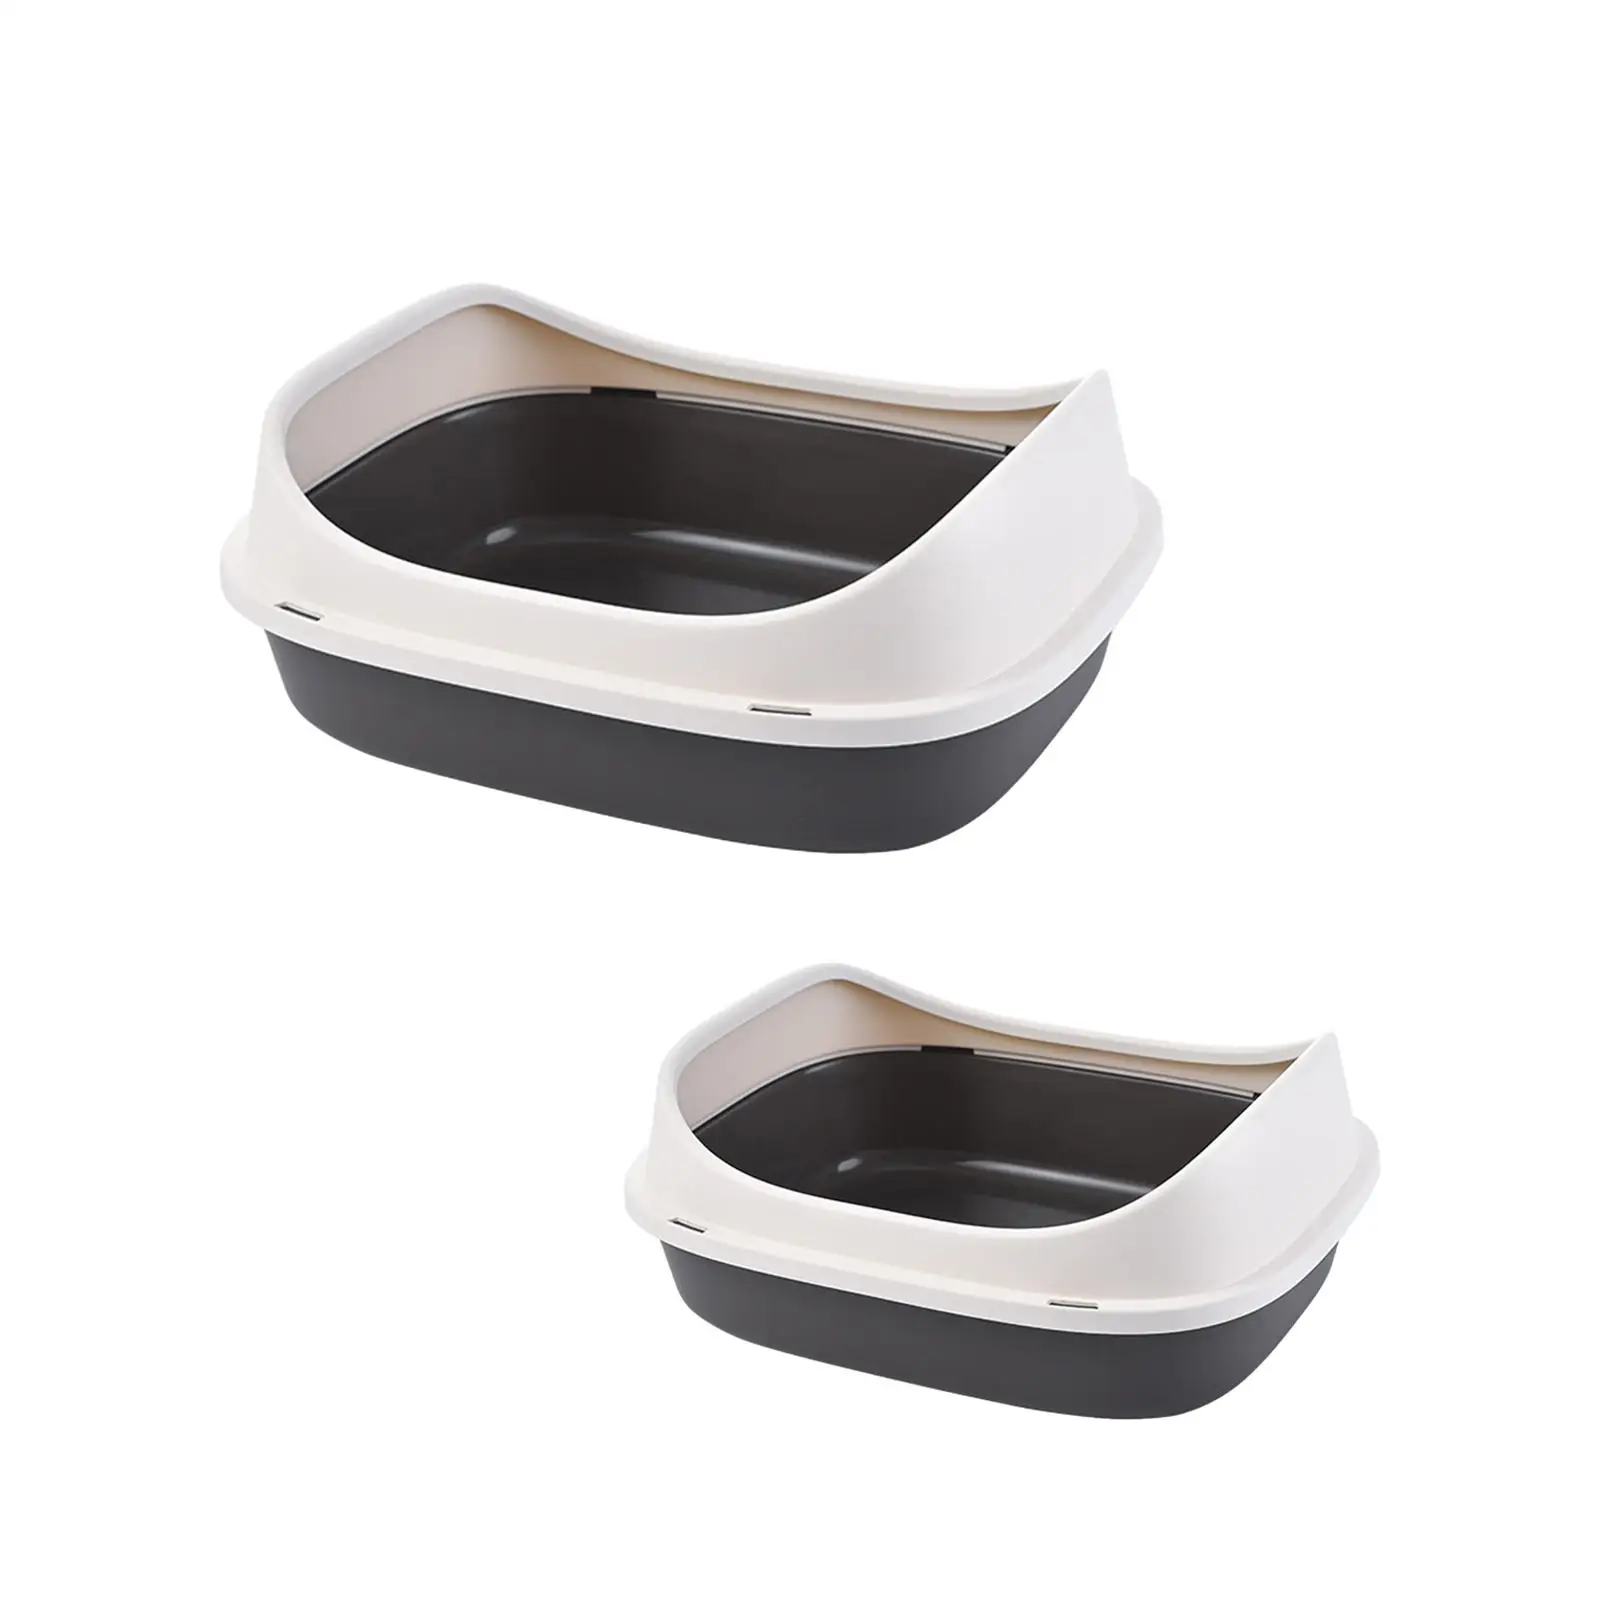 Litter Pan with High Sides and Scoop Cage Toilette Sand Box Container Open Top Cat Litter Box for Kitty Bunny Indoor Cats